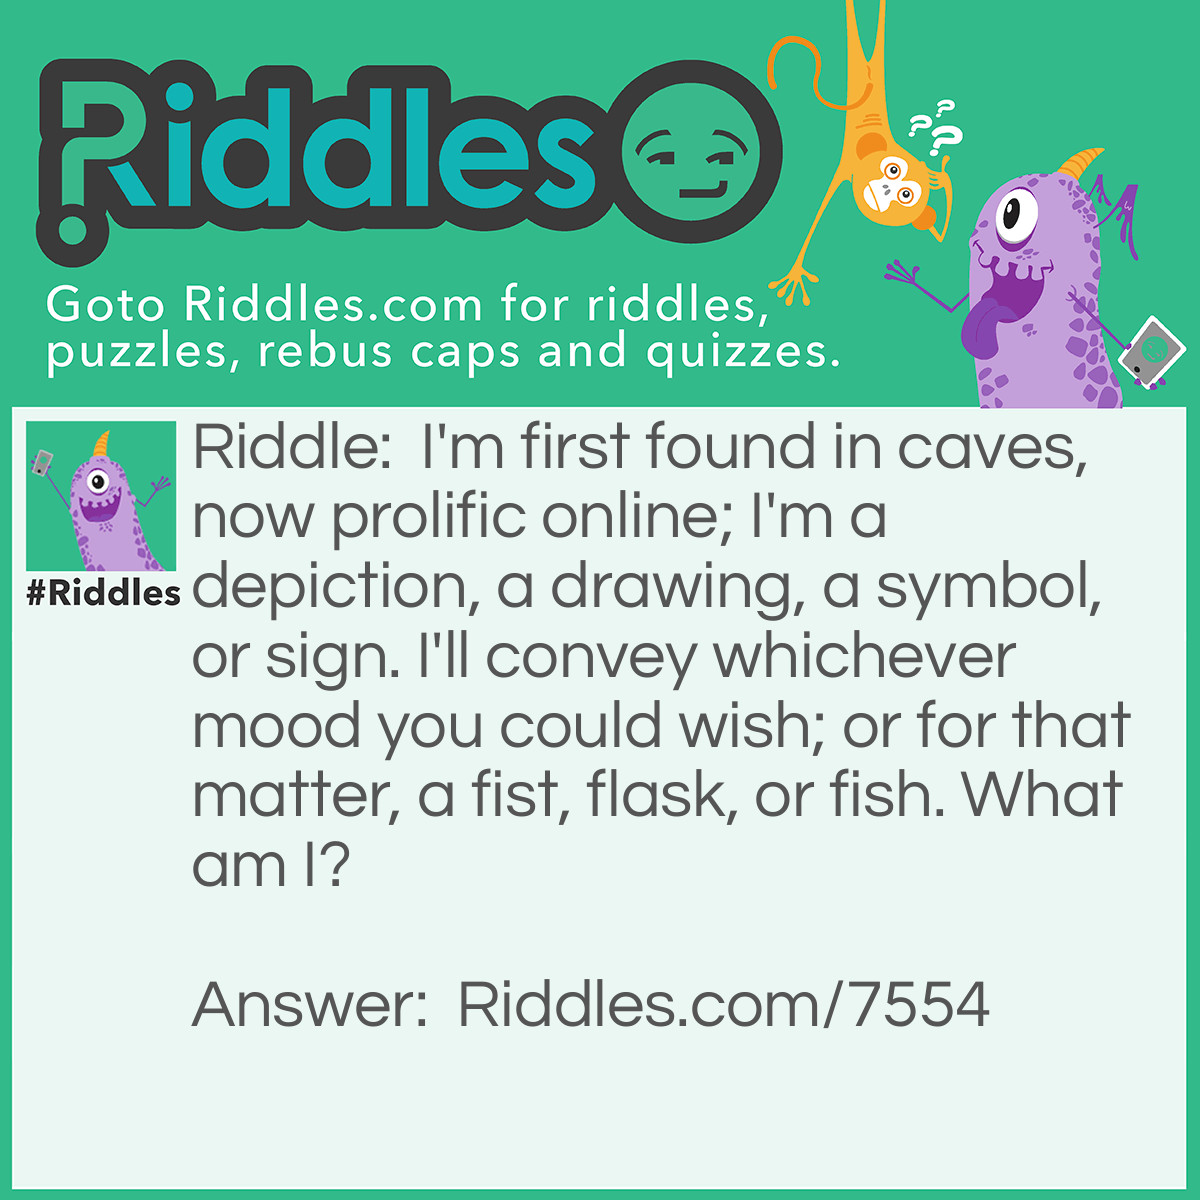 Riddle: I'm first found in caves, now prolific online; I'm a depiction, a drawing, a symbol, or sign. I'll convey whichever mood you could wish; or for that matter, a fist, flask, or fish. What am I? Answer: An emoji.